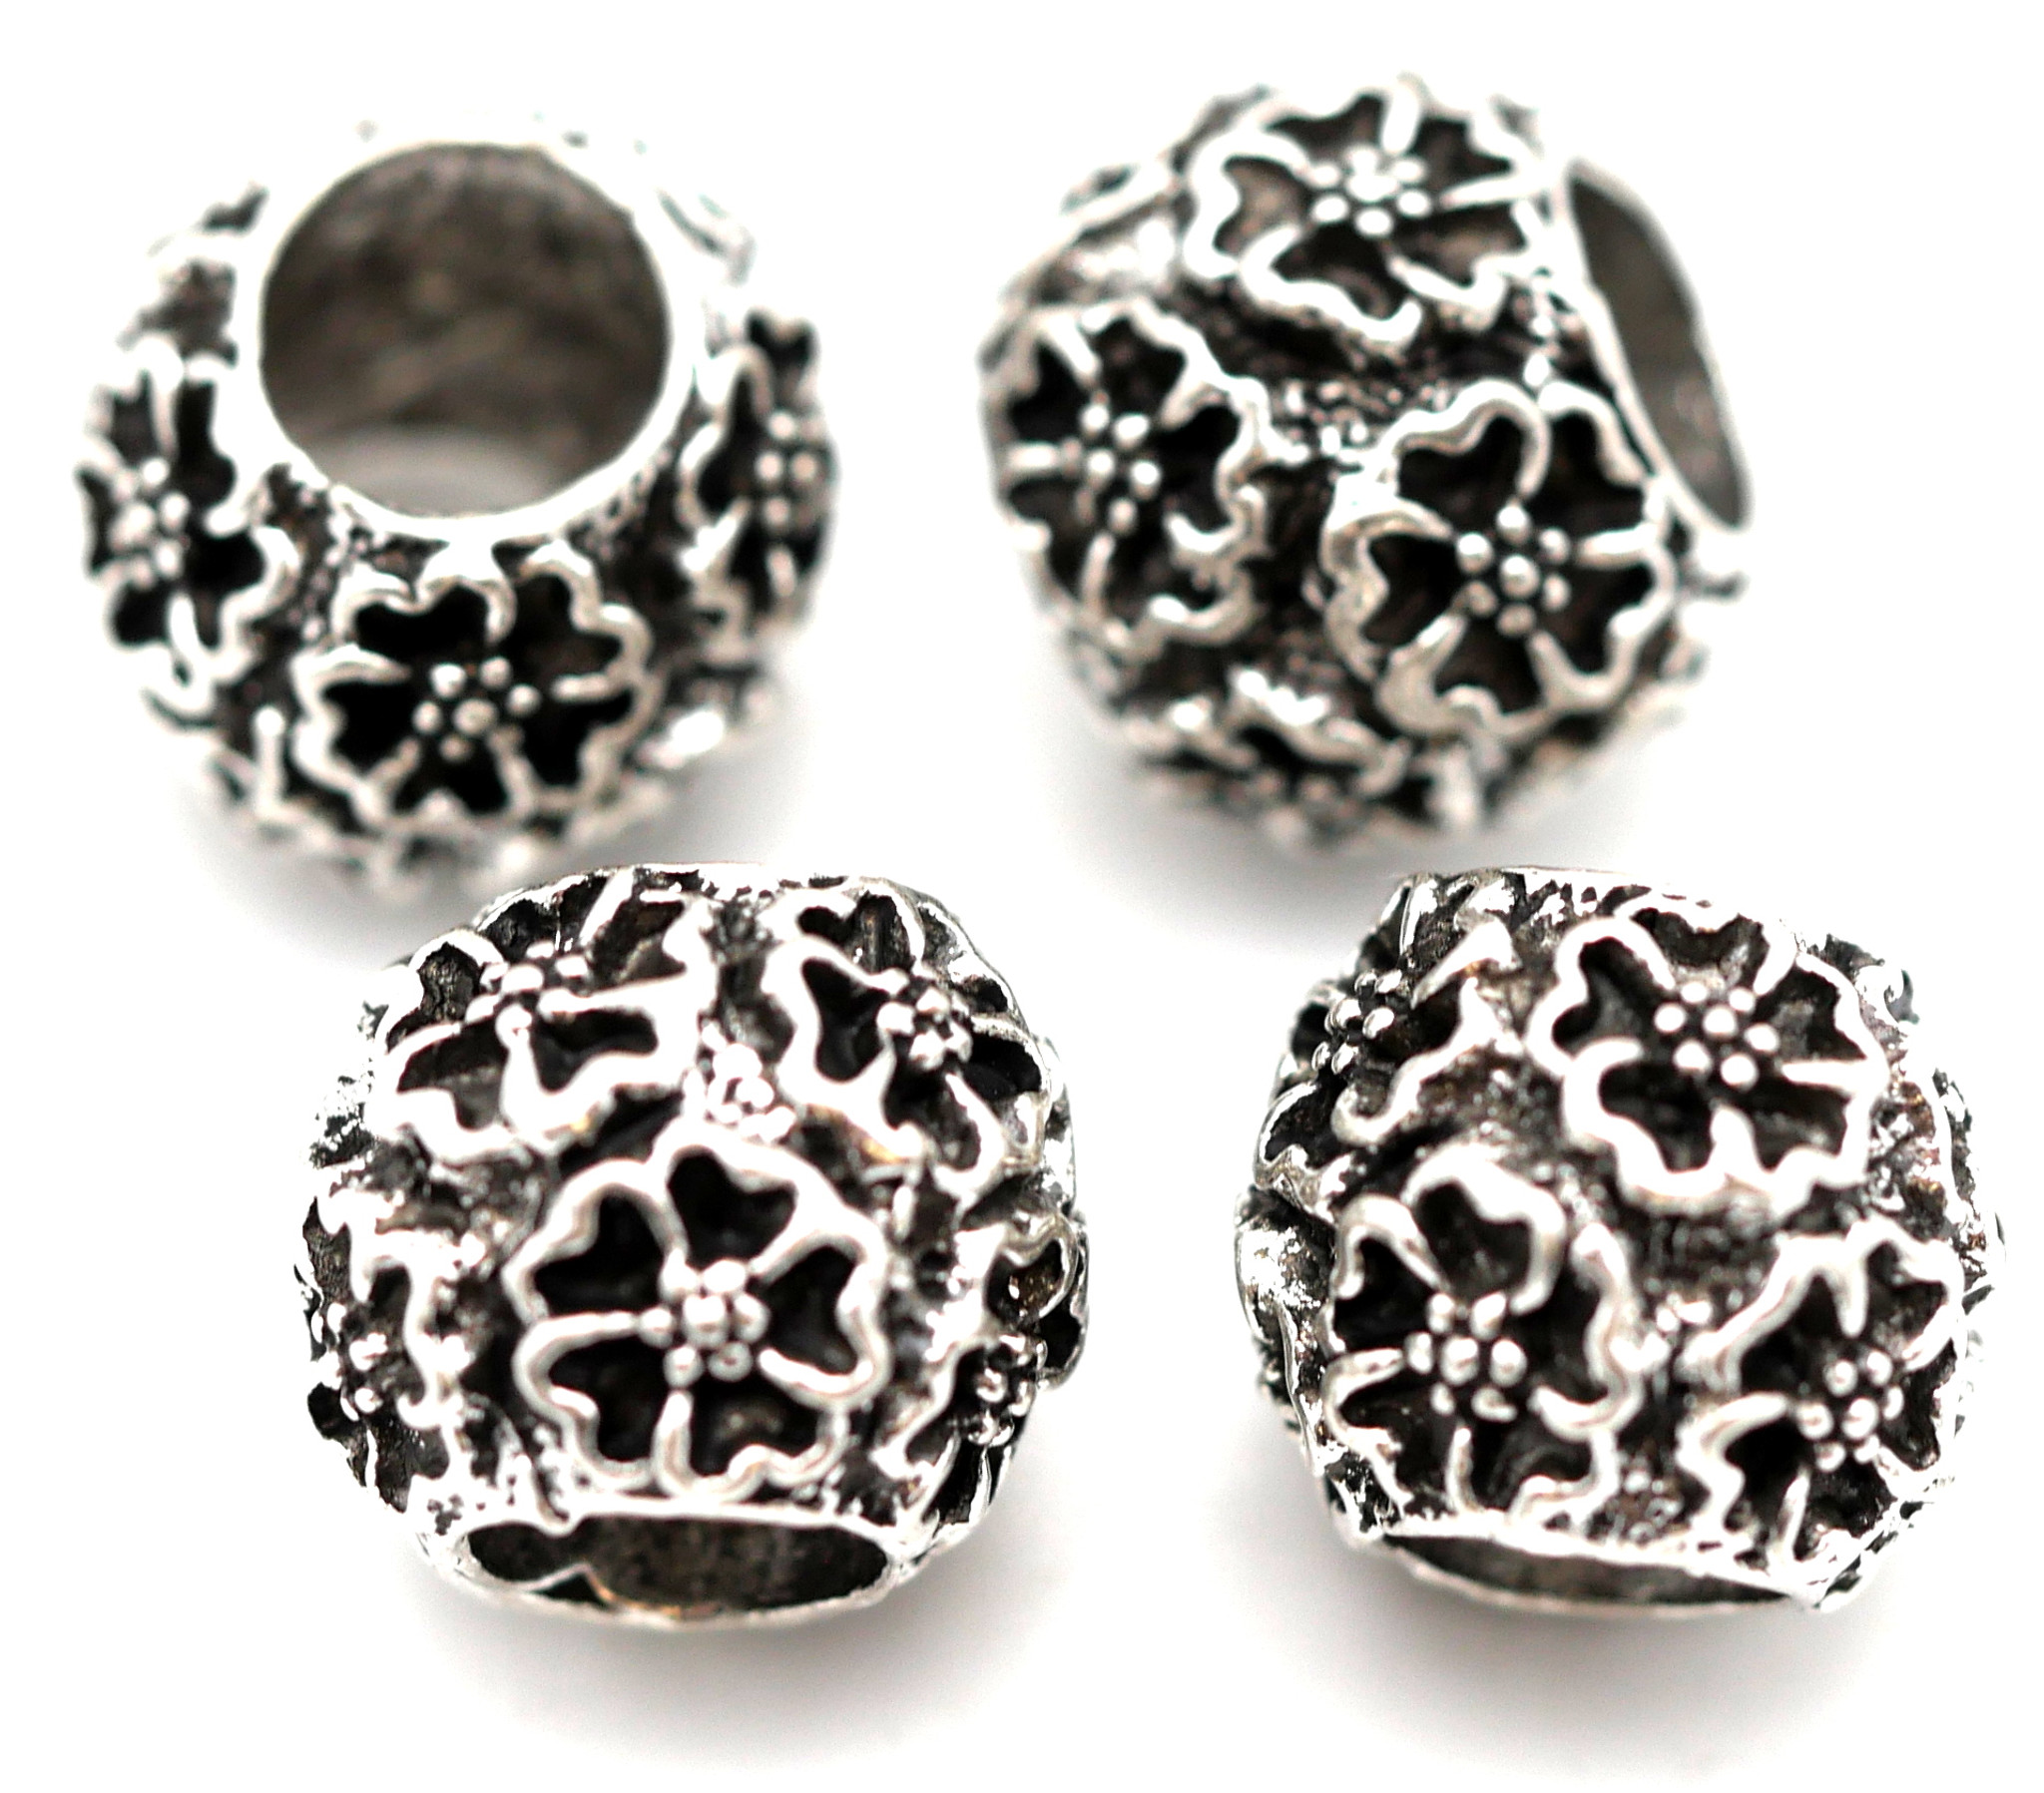 4pc Antique Silver Rondelle Large Hole Beads